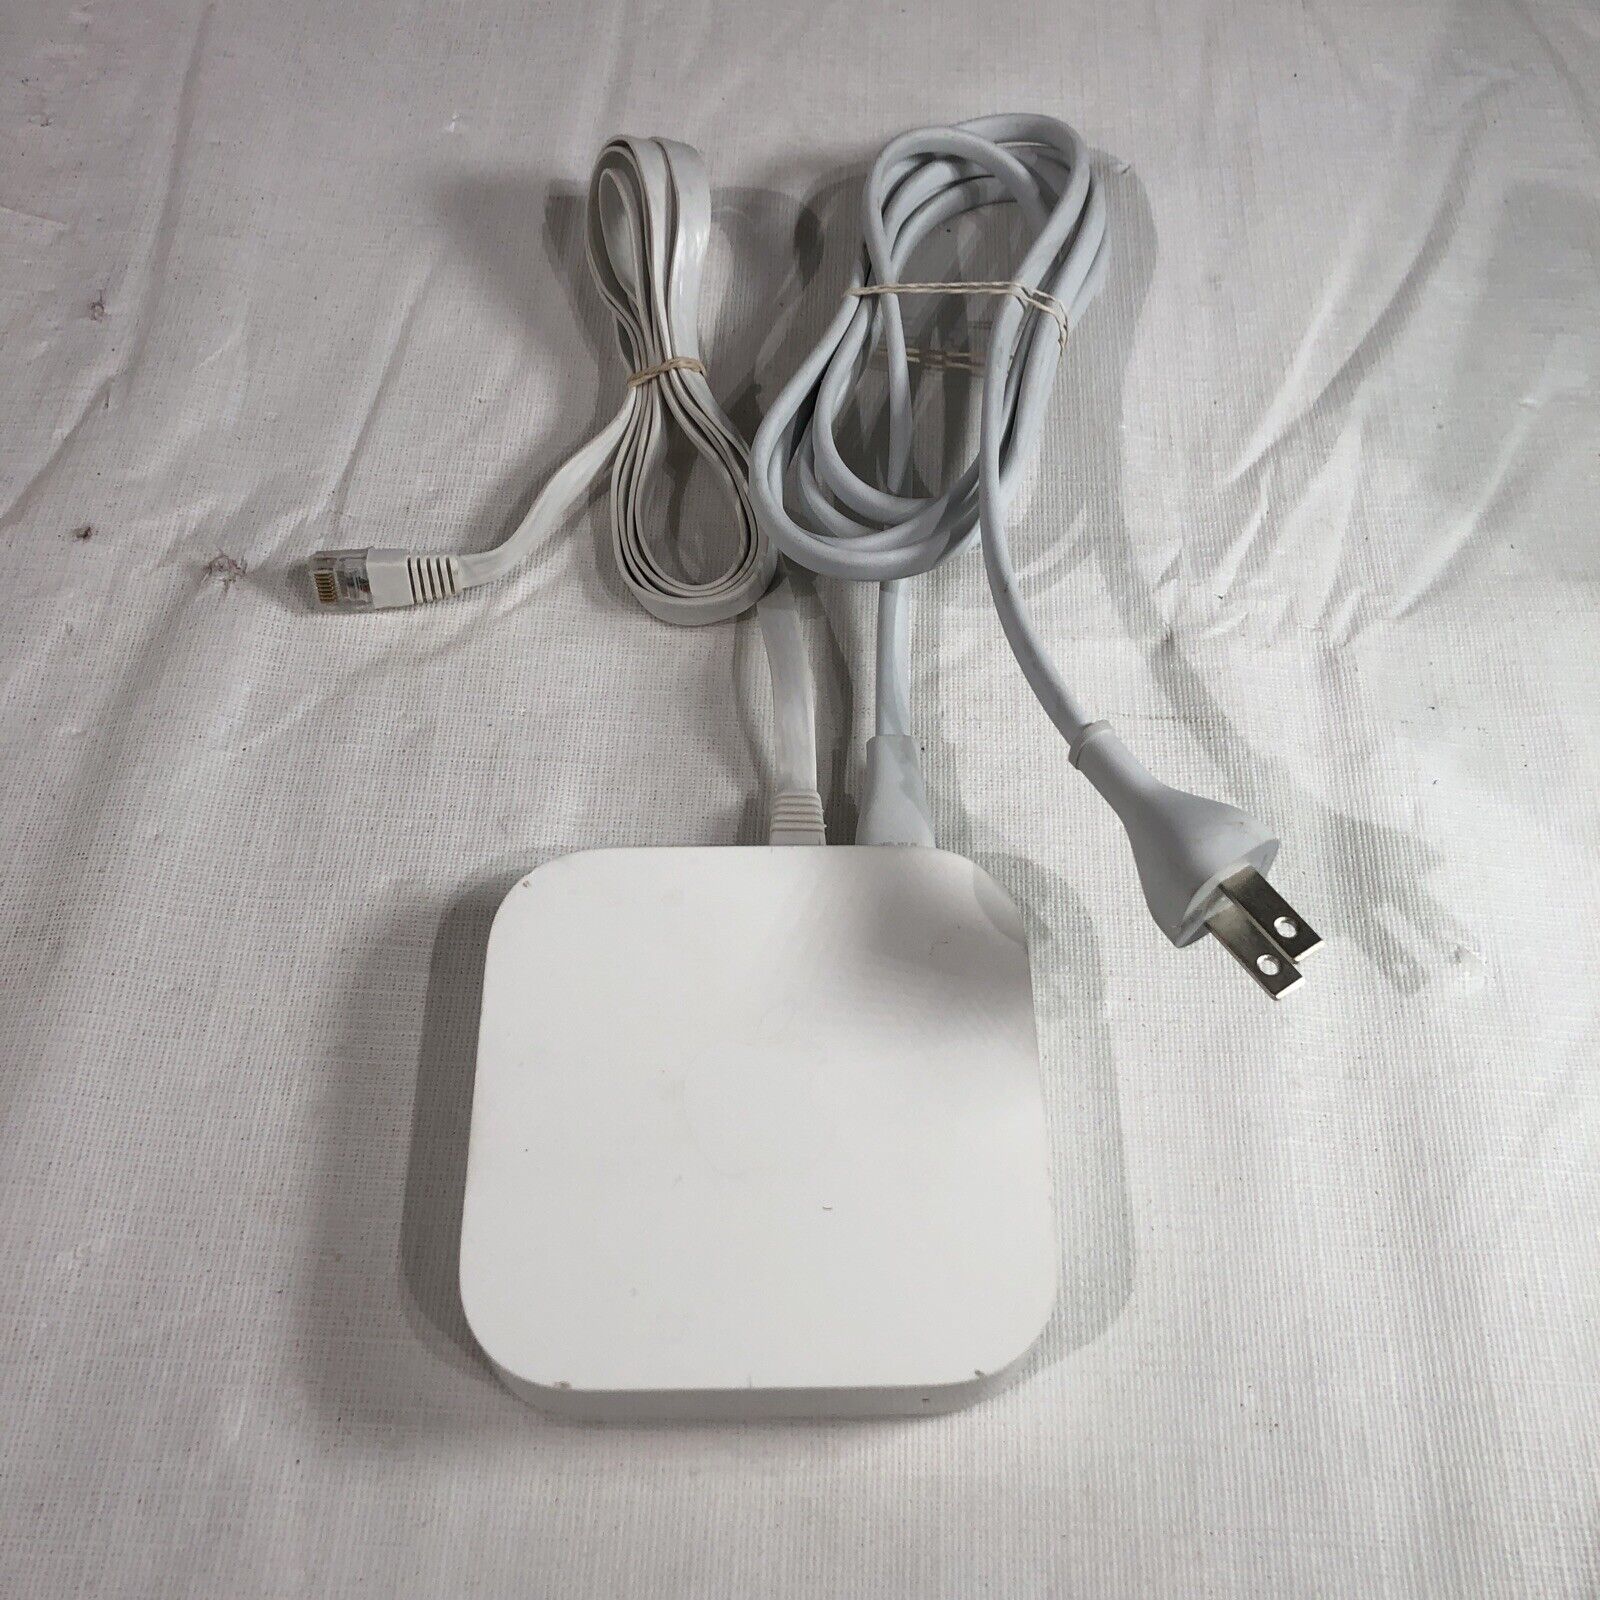 Apple Airport Express A1392 2nd Generation 802.11n WiFi Router 